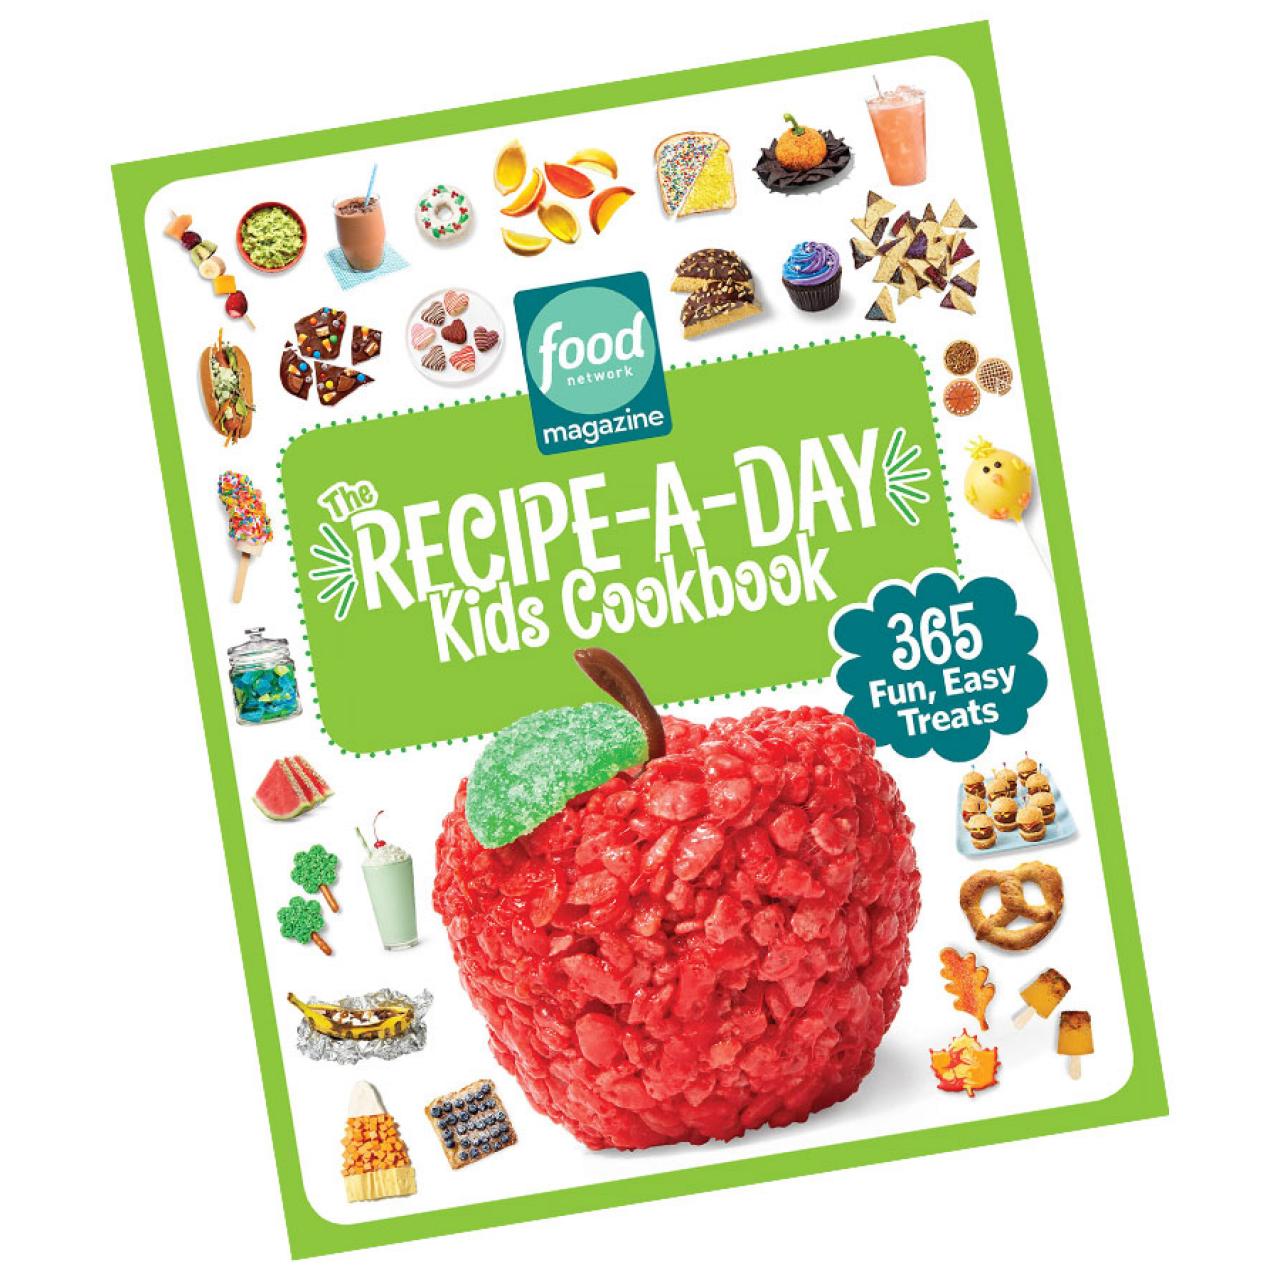 The Recipe-A-Day Kids Cookbook, Shopping : Food Network